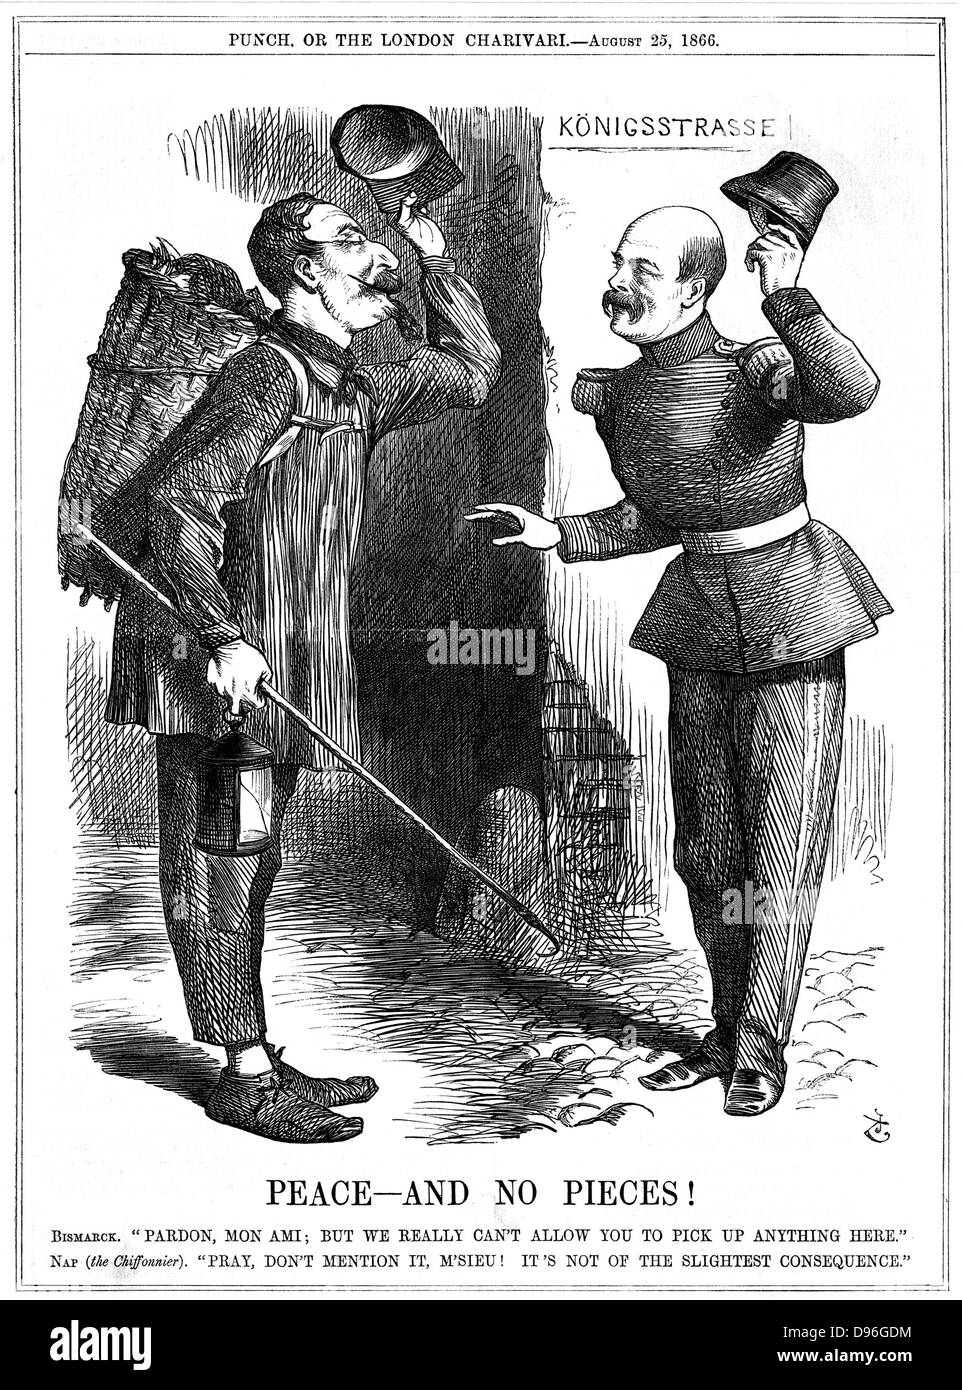 Napoleon III,  French Emperor 1852-1870, dressed as a rag-picker (Chiffonnier), warned off by Otto von Bismarck, the Prussian Chancellor. Napoleon's territorial ambitions led to Franco-Prussian War of 1870-71. John Tenniel cartoon from Punch, London, 25 August 1866. Stock Photo